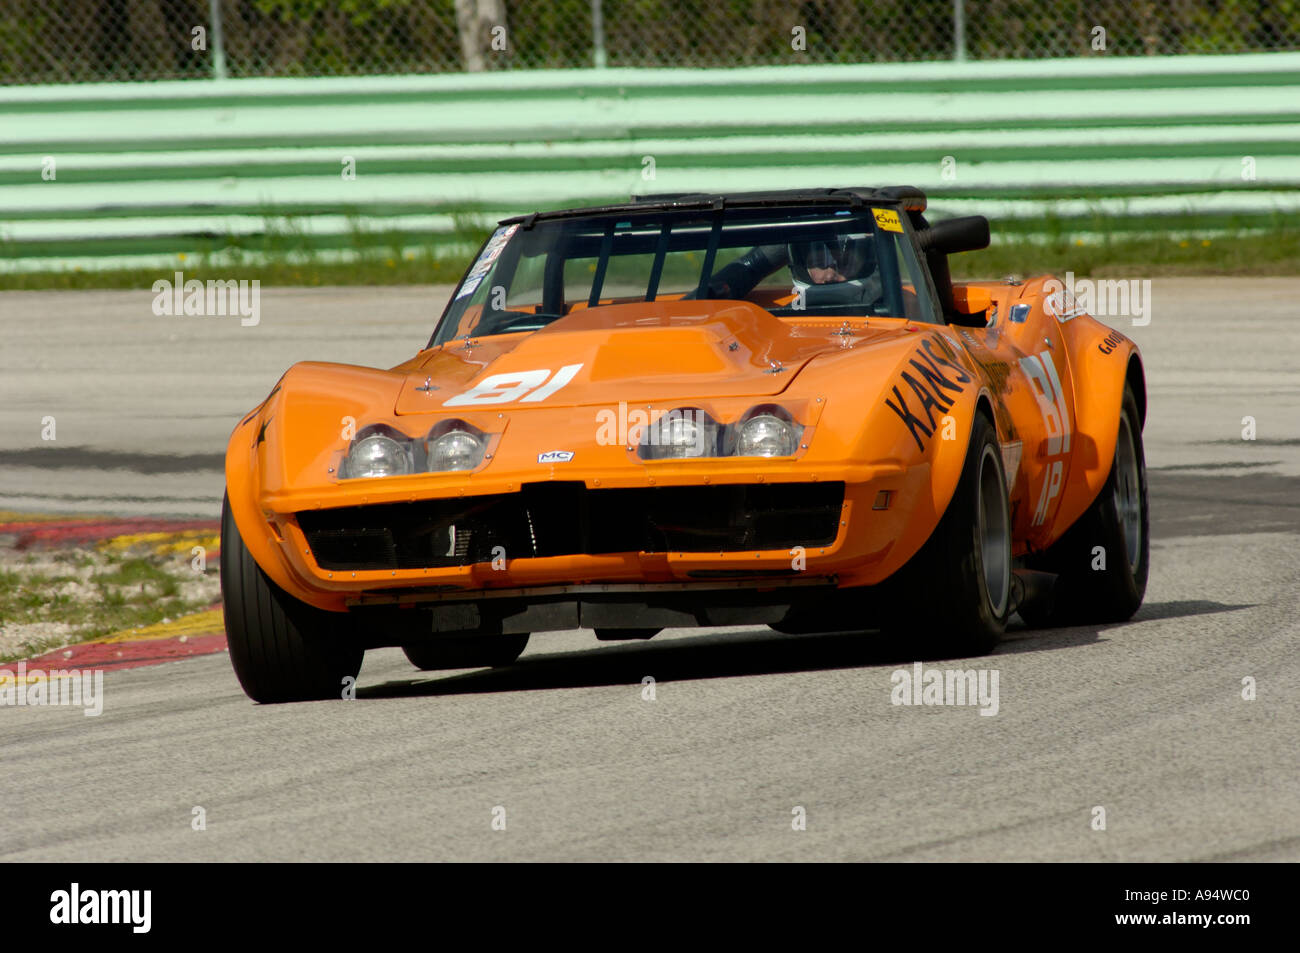 John Rische races his 1969 Chevrolet Corvette Roadster at the Vintage GT Challenge at Road America 2005 Stock Photo